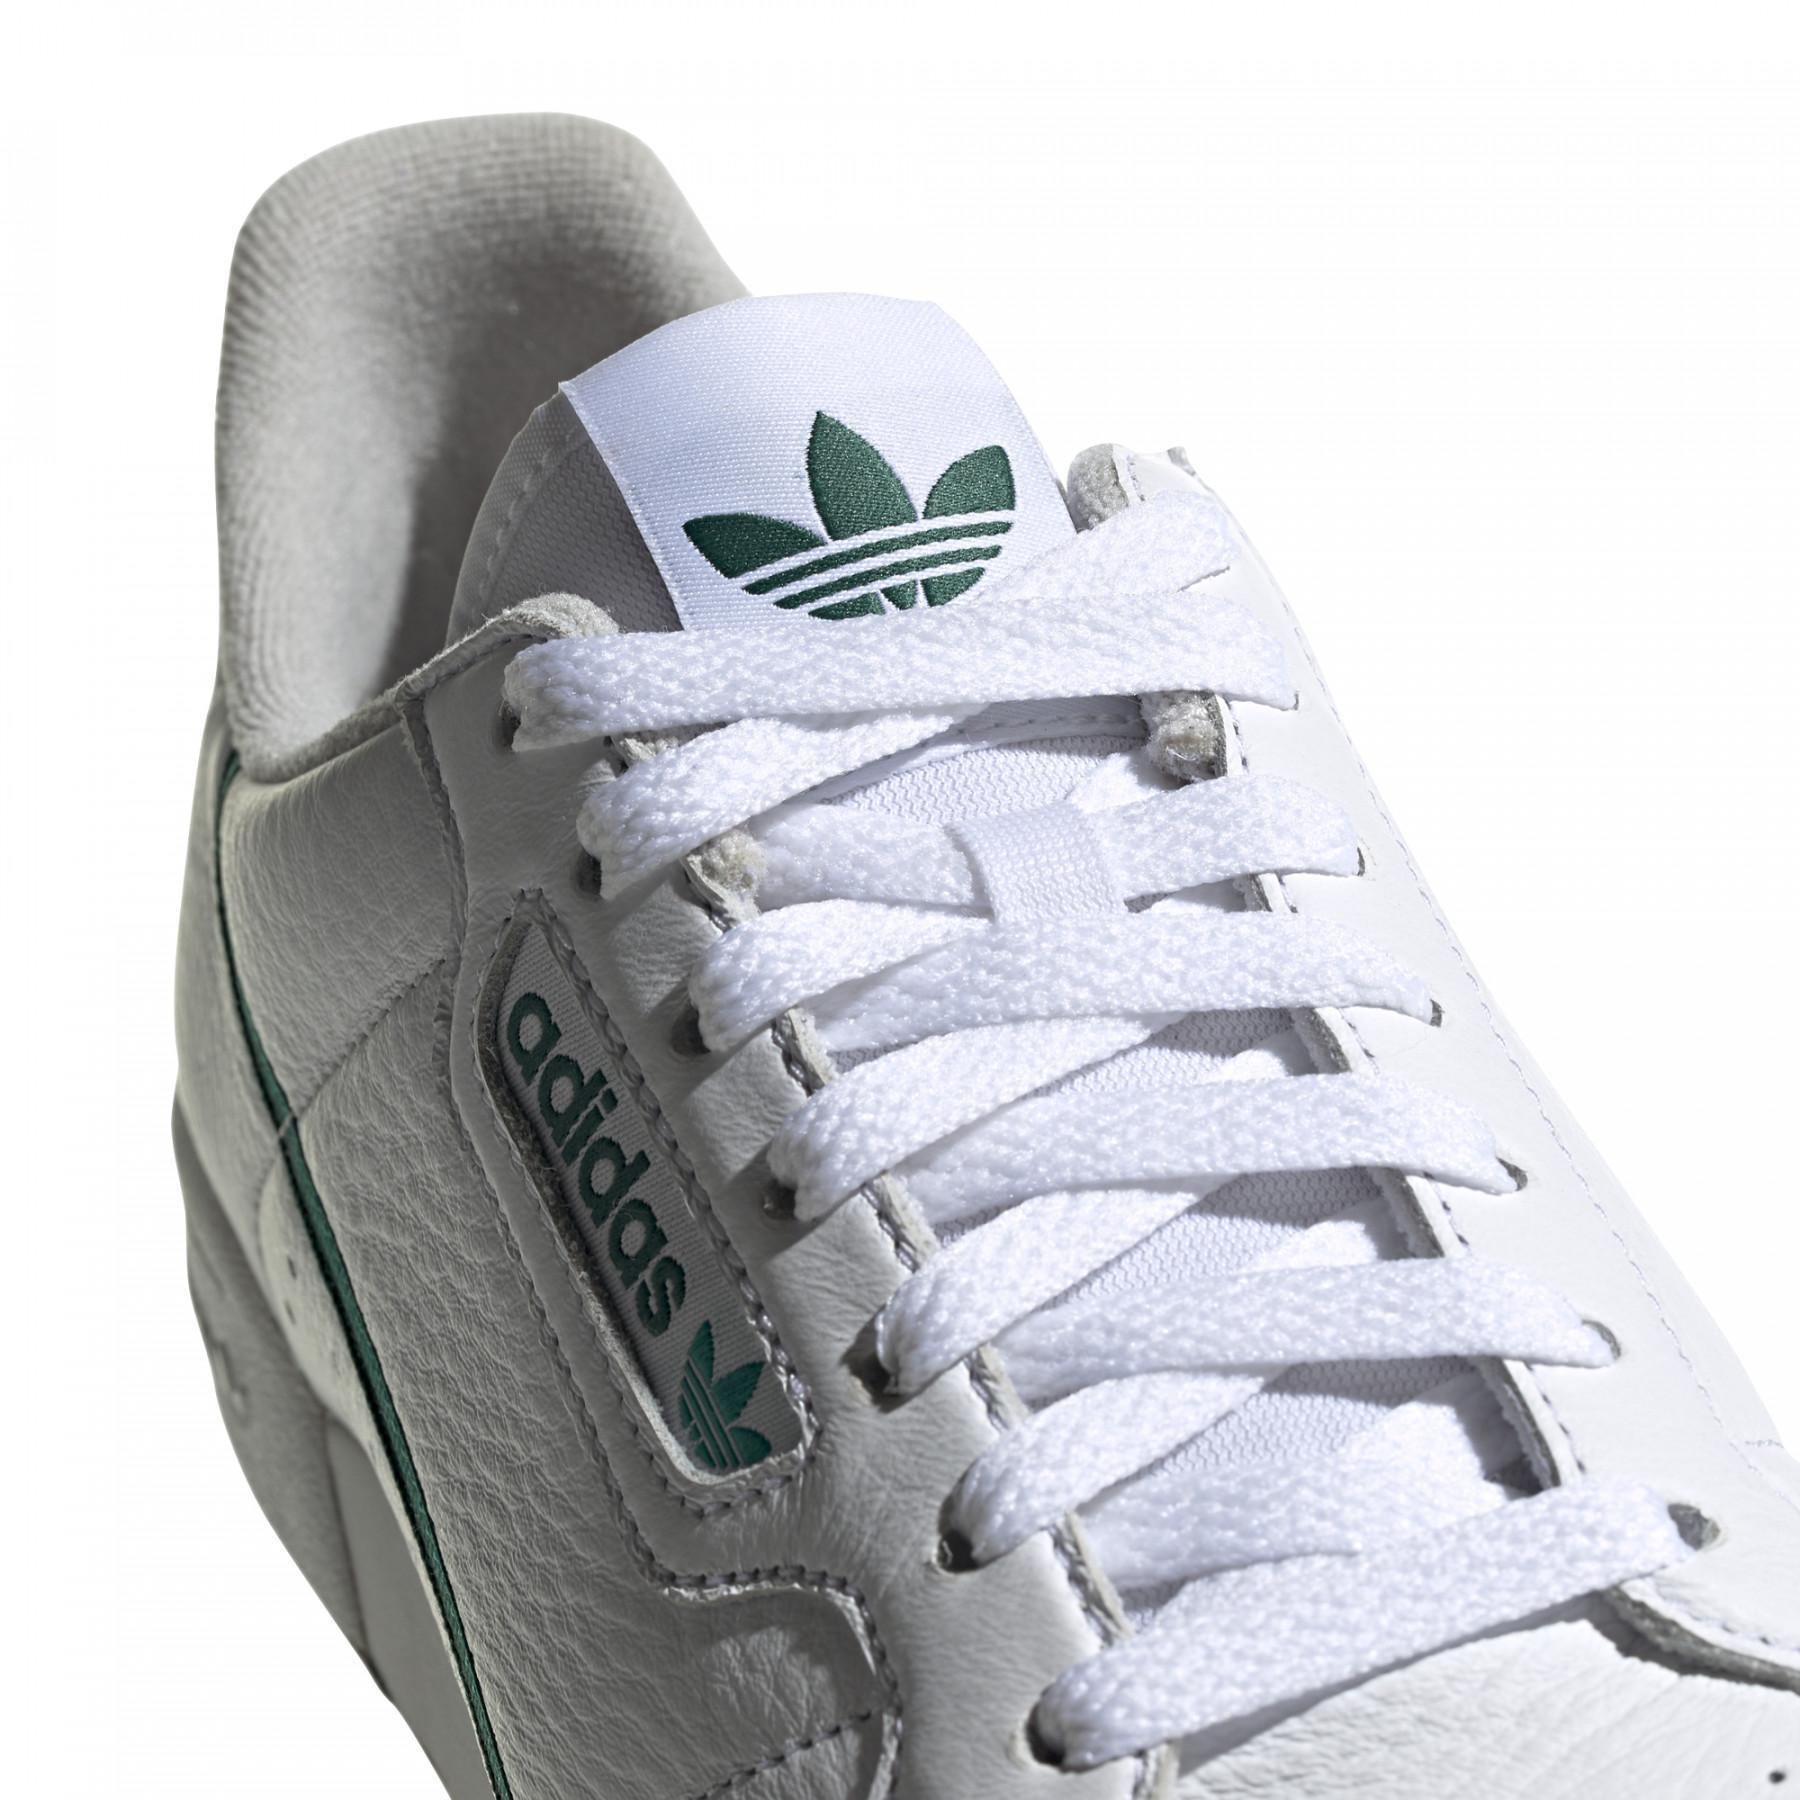 Sneakers Adidas Continental 80